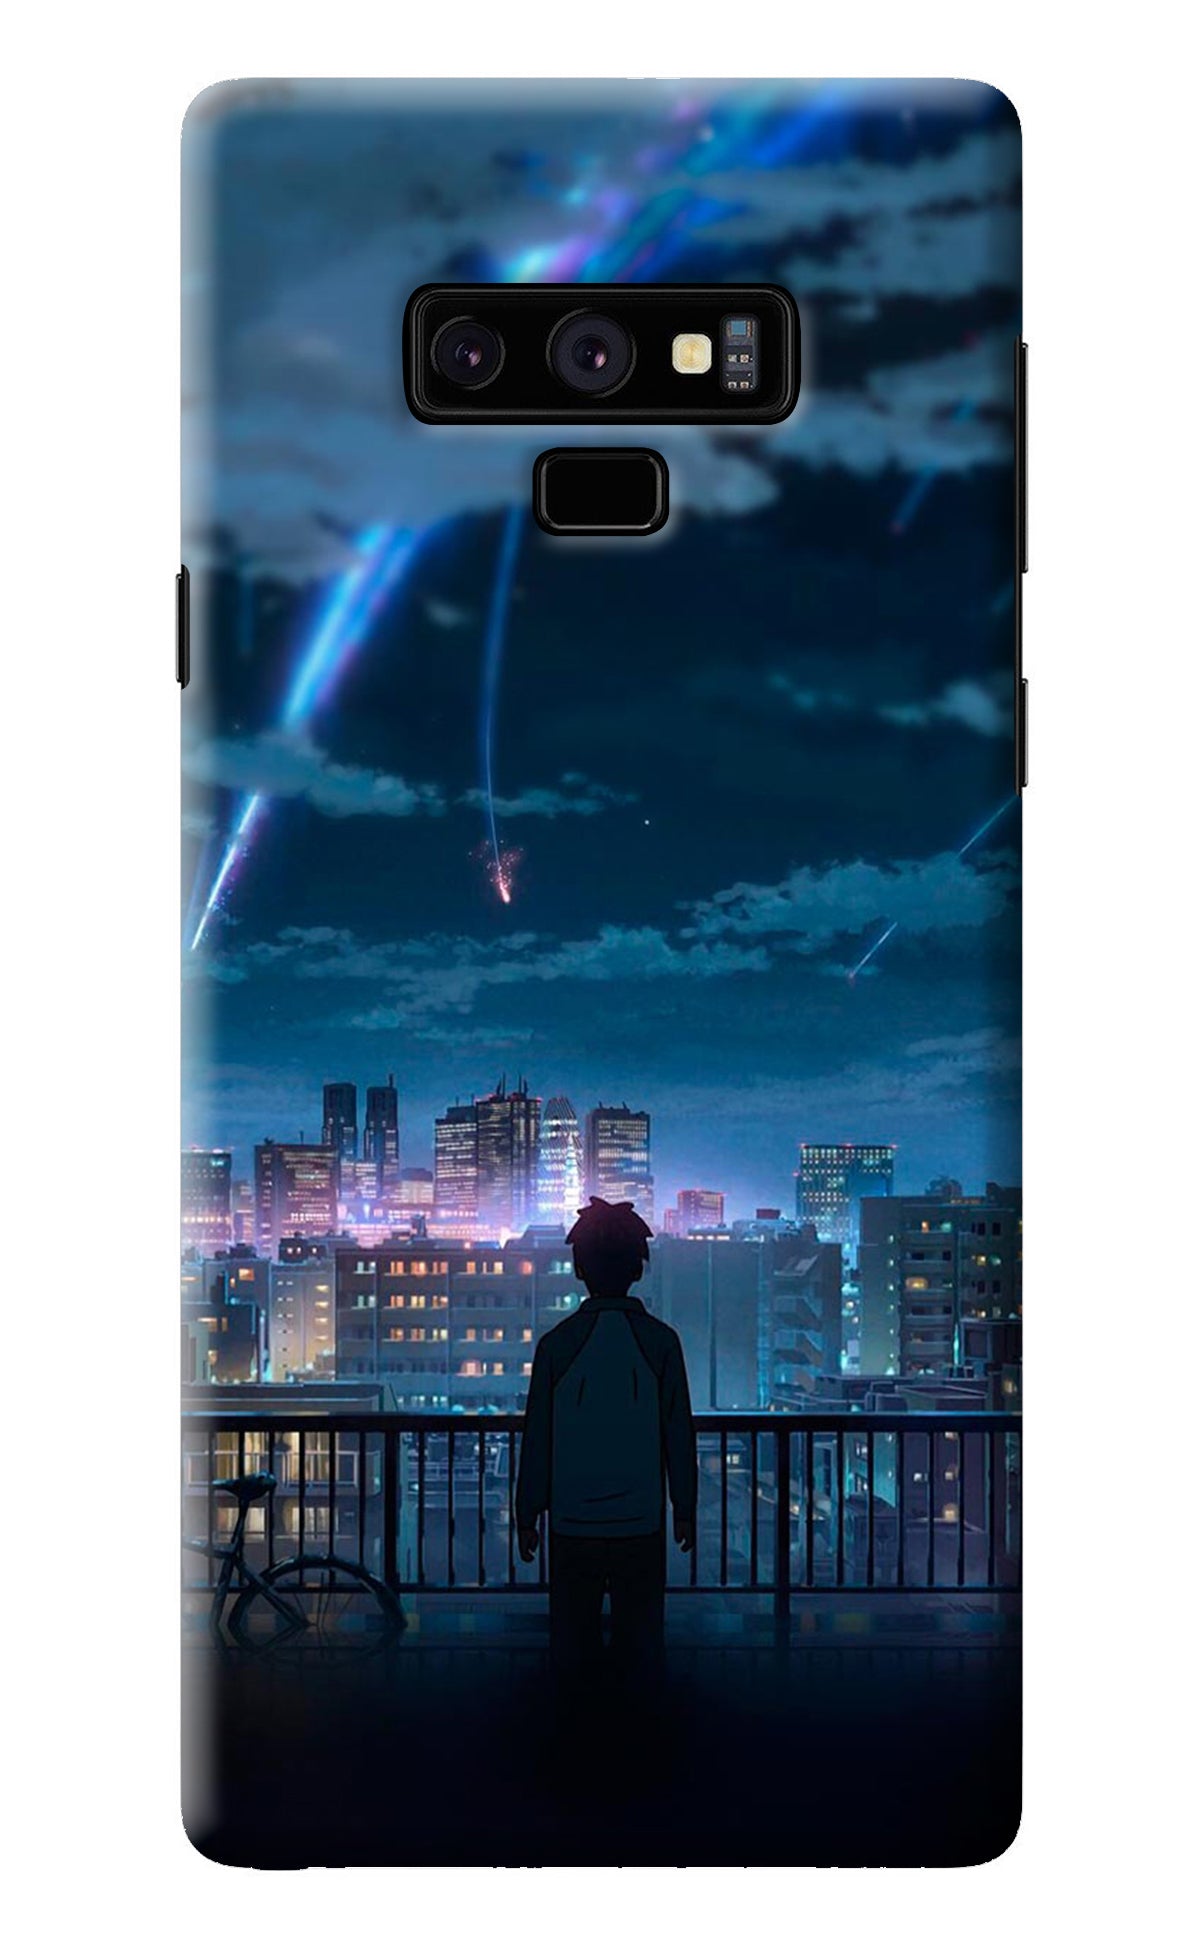 Anime Samsung Note 9 Back Cover